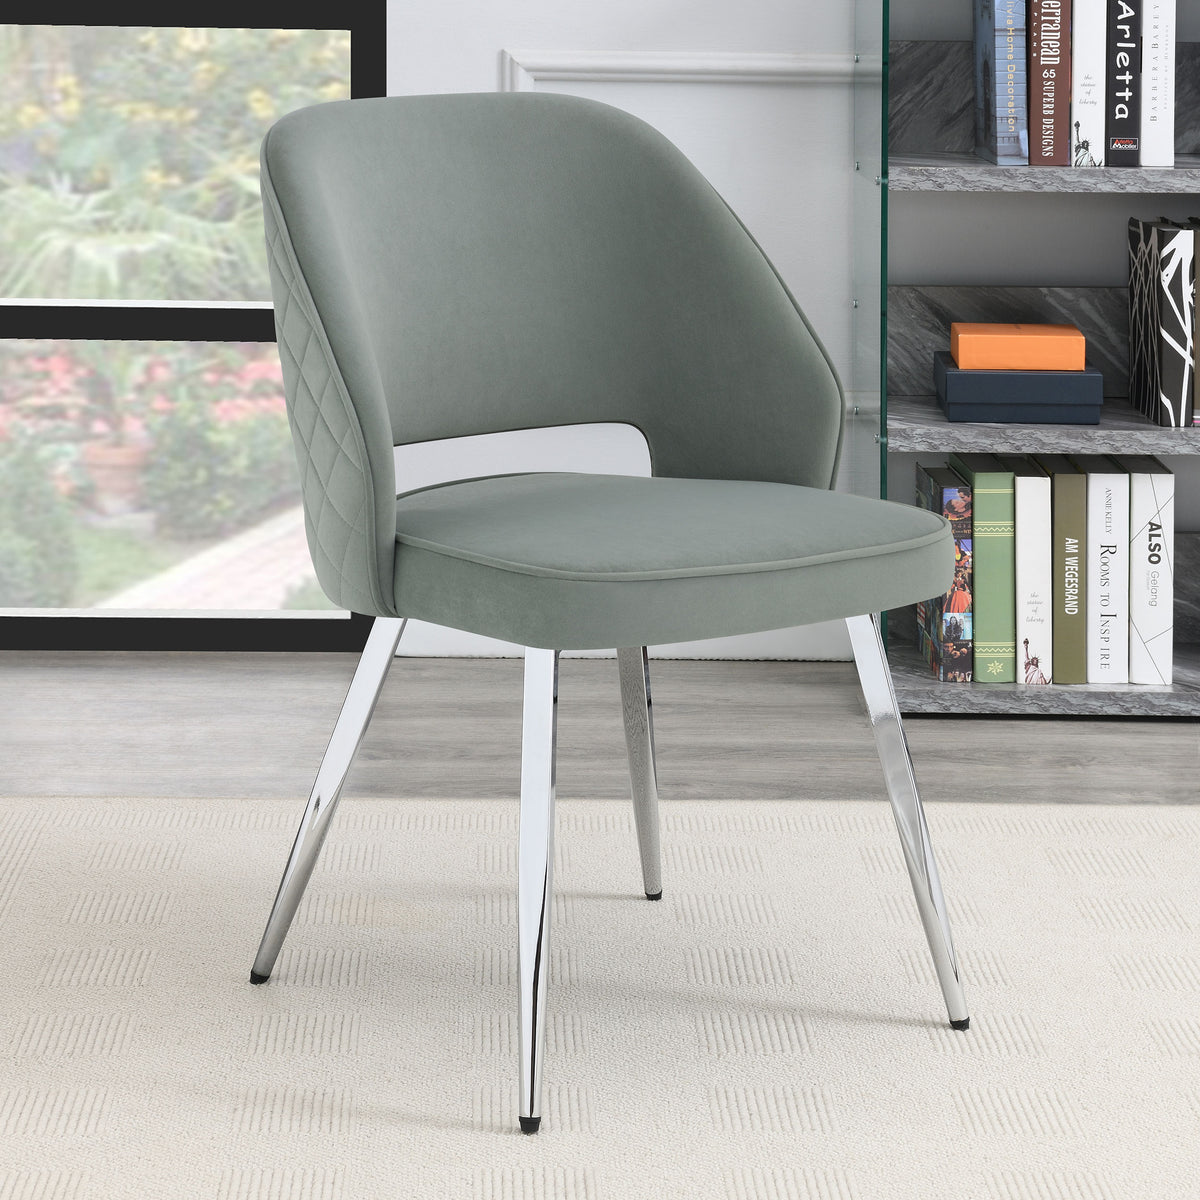 Hastings Upholstered Dining Chairs with Open Back (Set of 2) Grey and Chrome Hastings Upholstered Dining Chairs with Open Back (Set of 2) Grey and Chrome Half Price Furniture